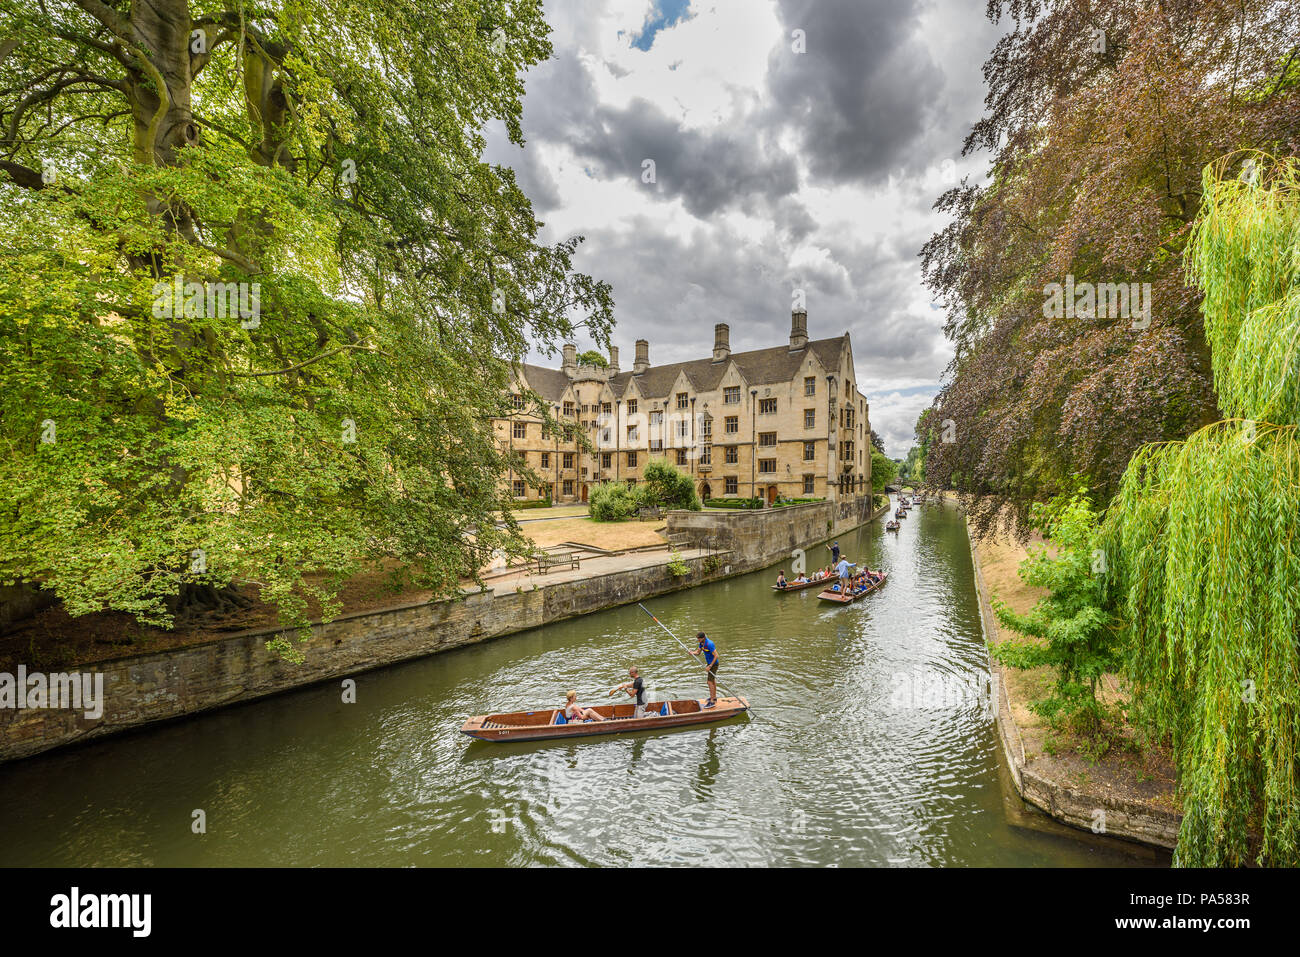 Bodley's Court at King's college, university of Cambridge, England, as seen from a bridge over the river Cam on a sunny yet cloudy summer day. Stock Photo